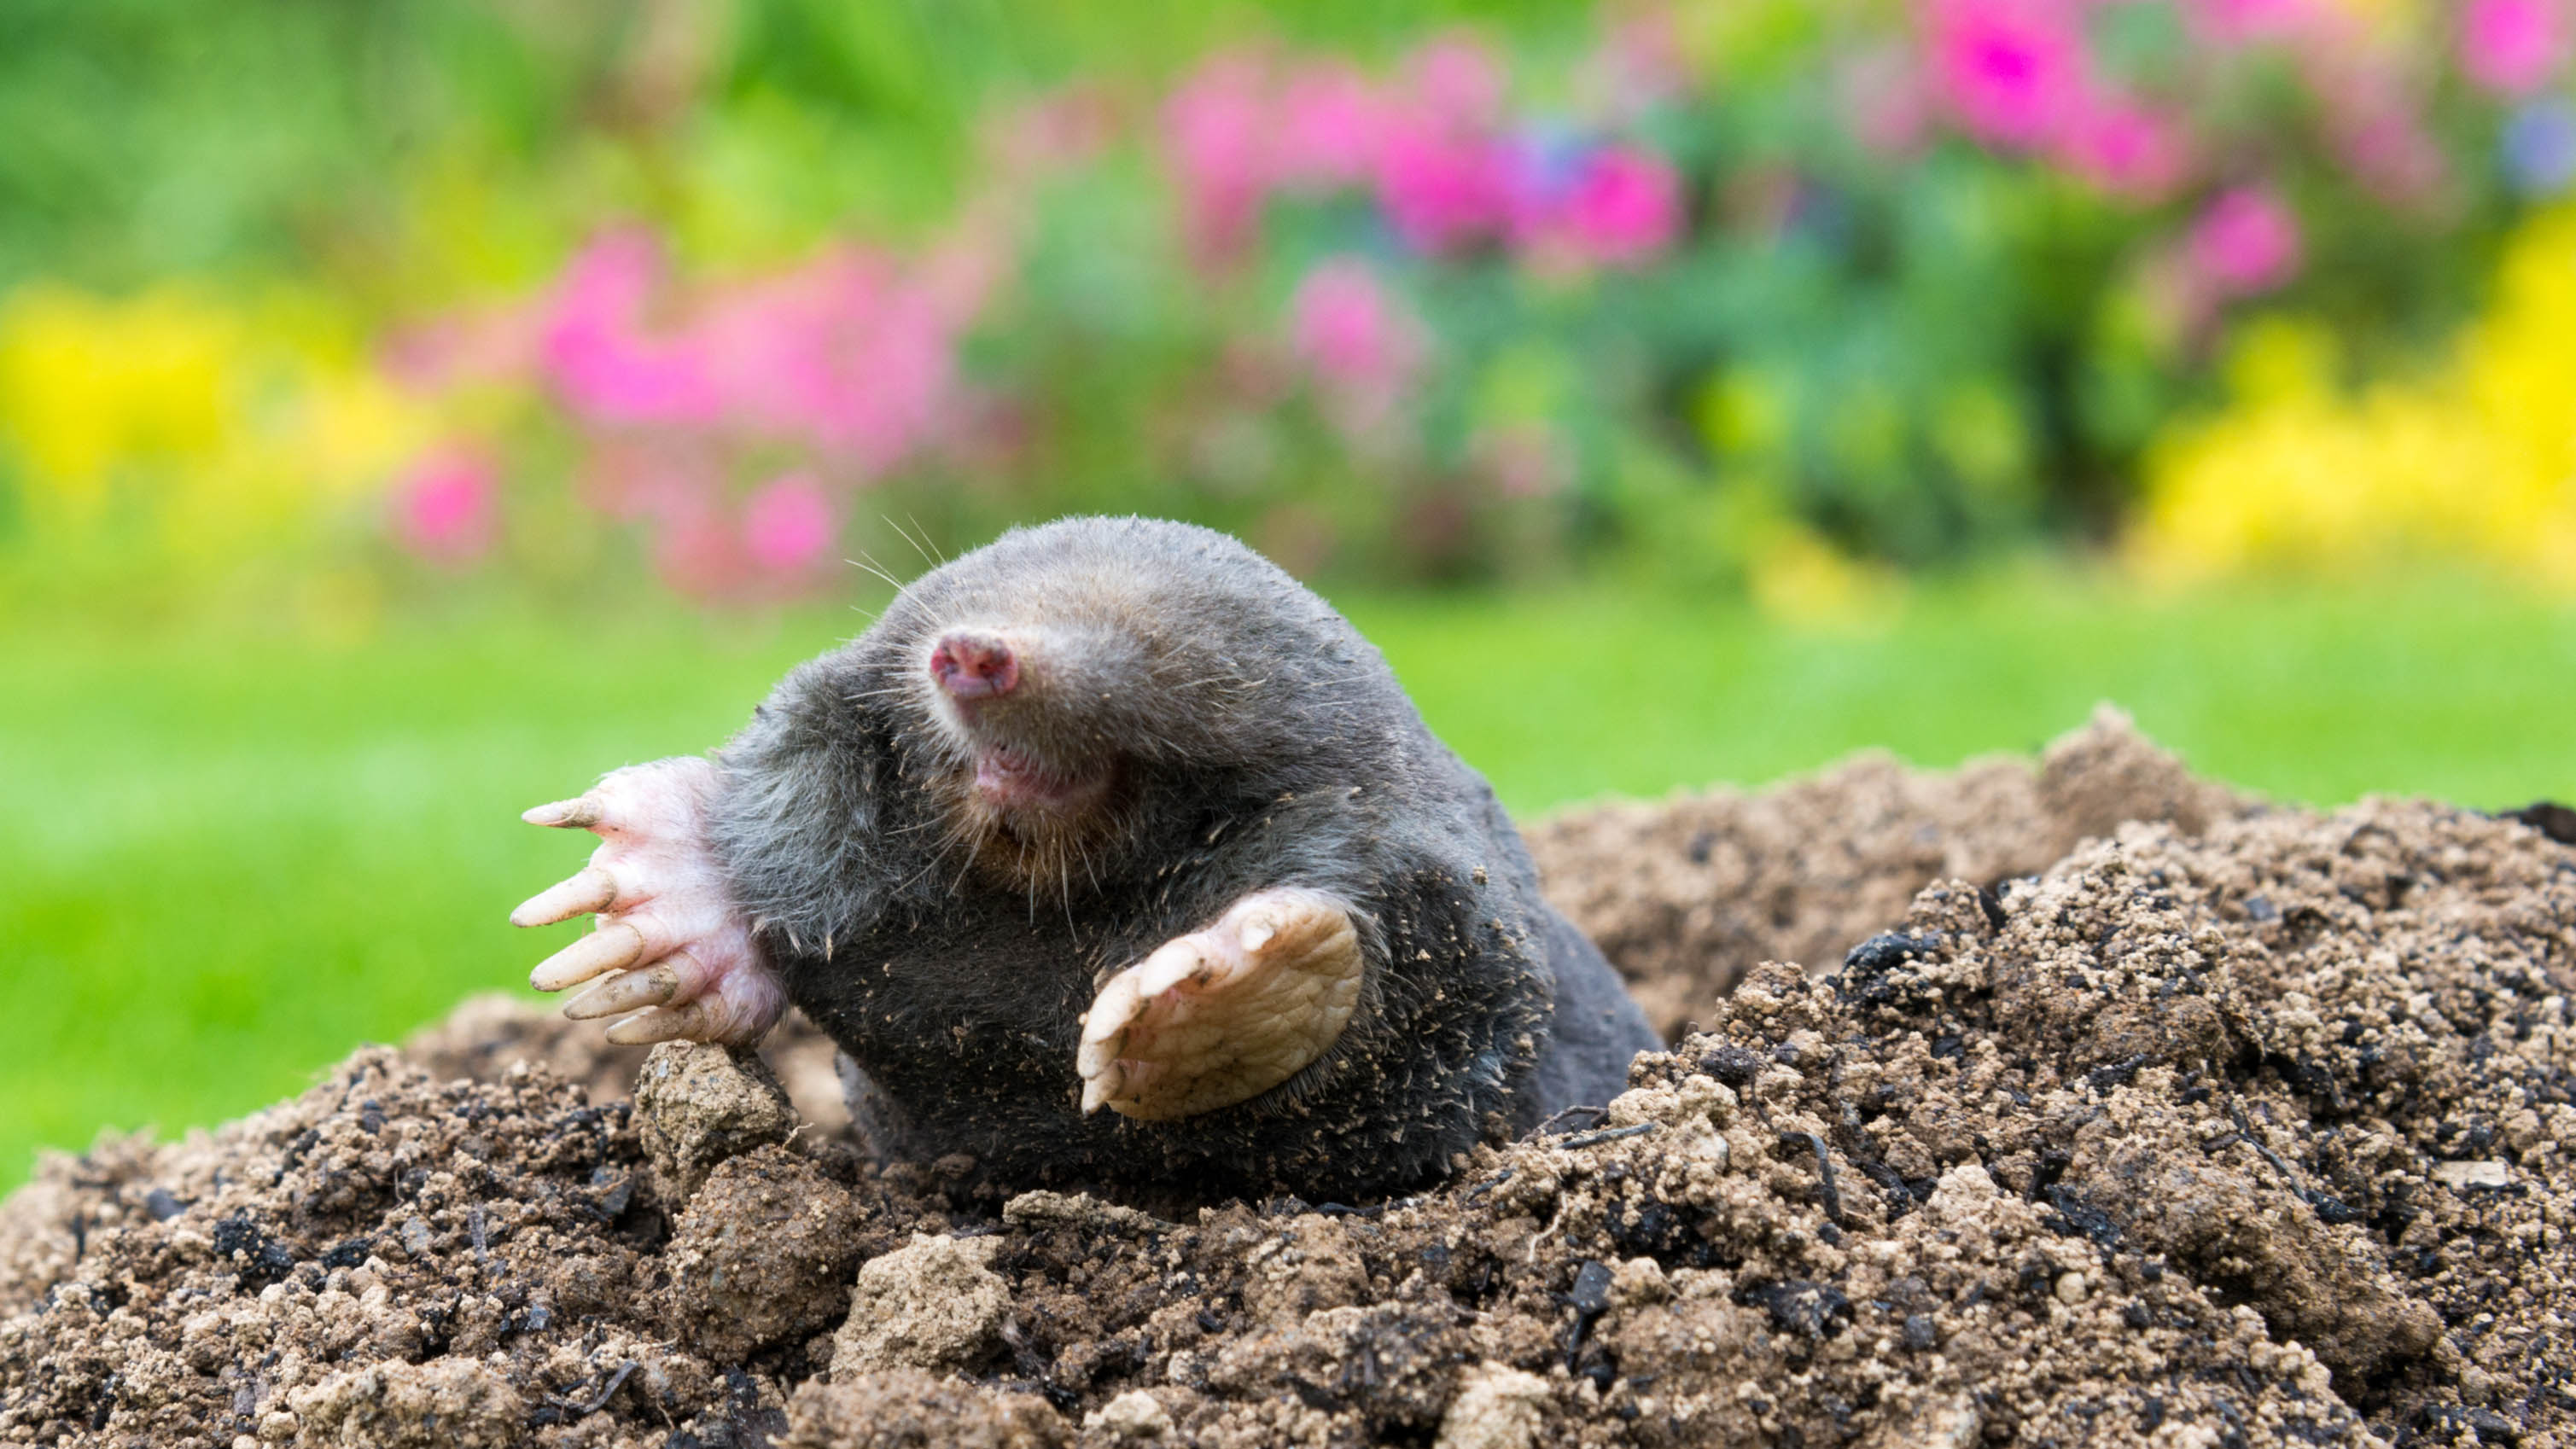 How to prevent and keep moles away